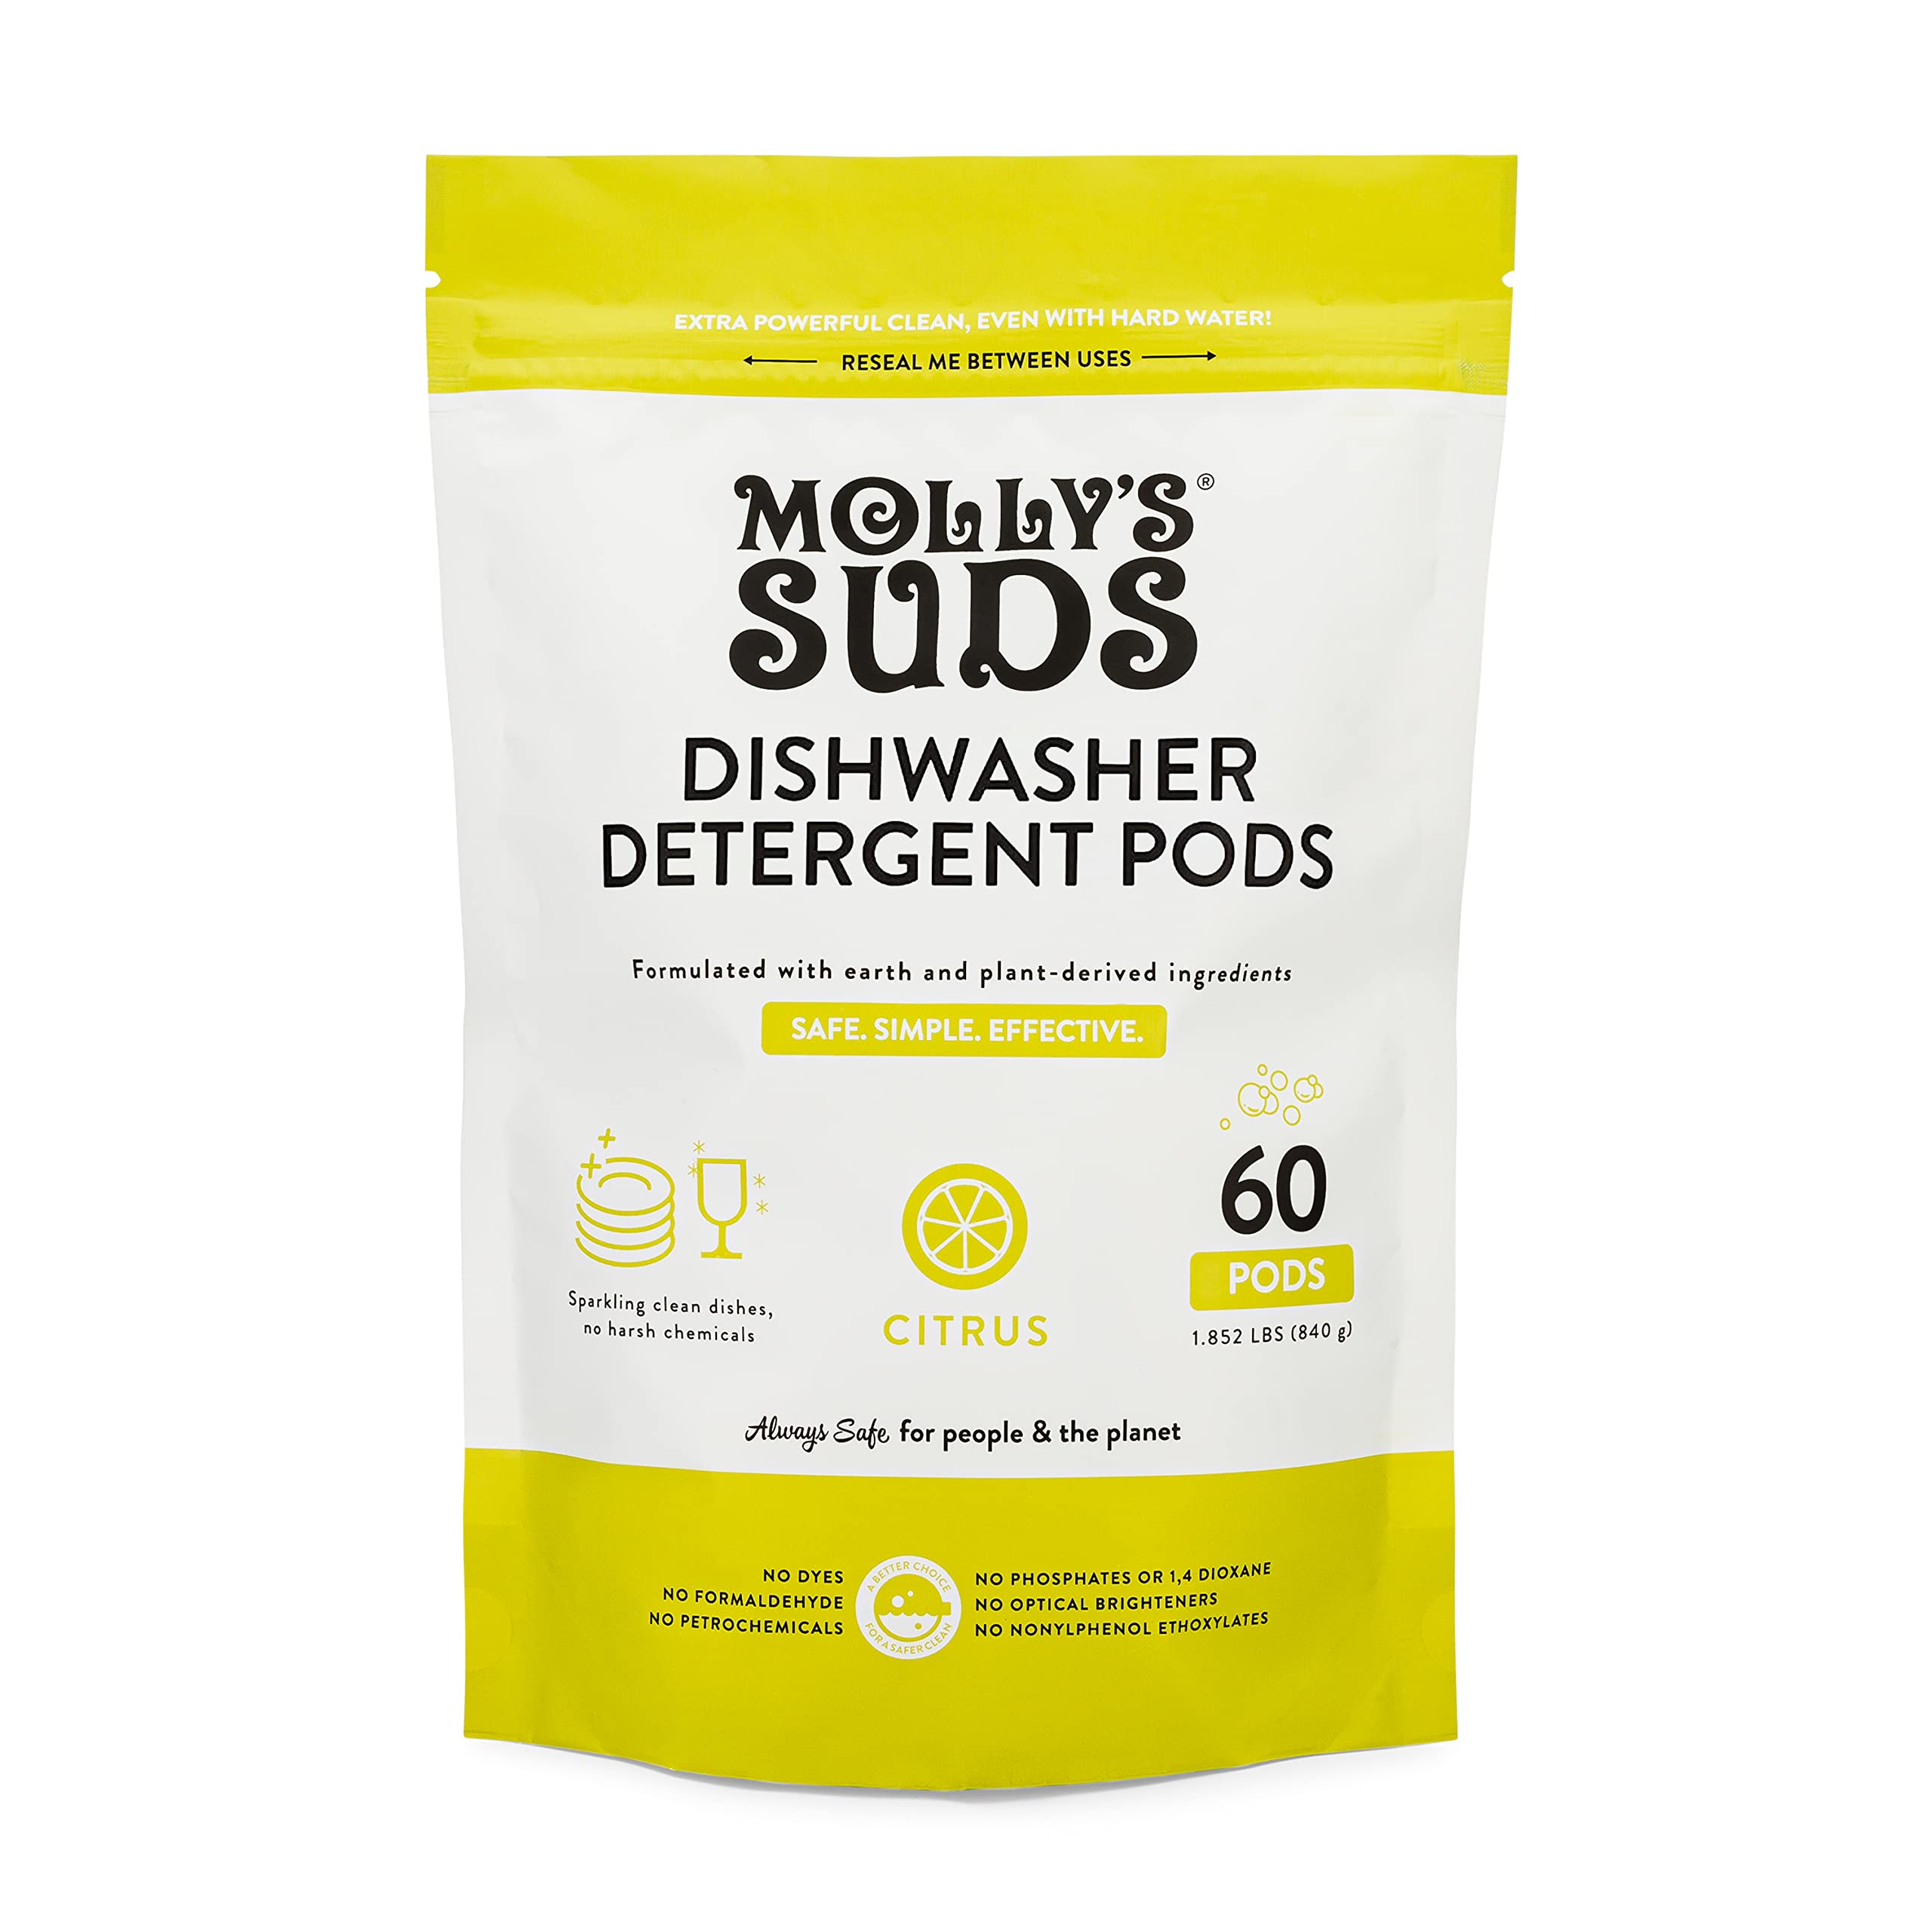 Molly's Suds Dishwasher Pods | Amazon Non-toxic Cleaning Products